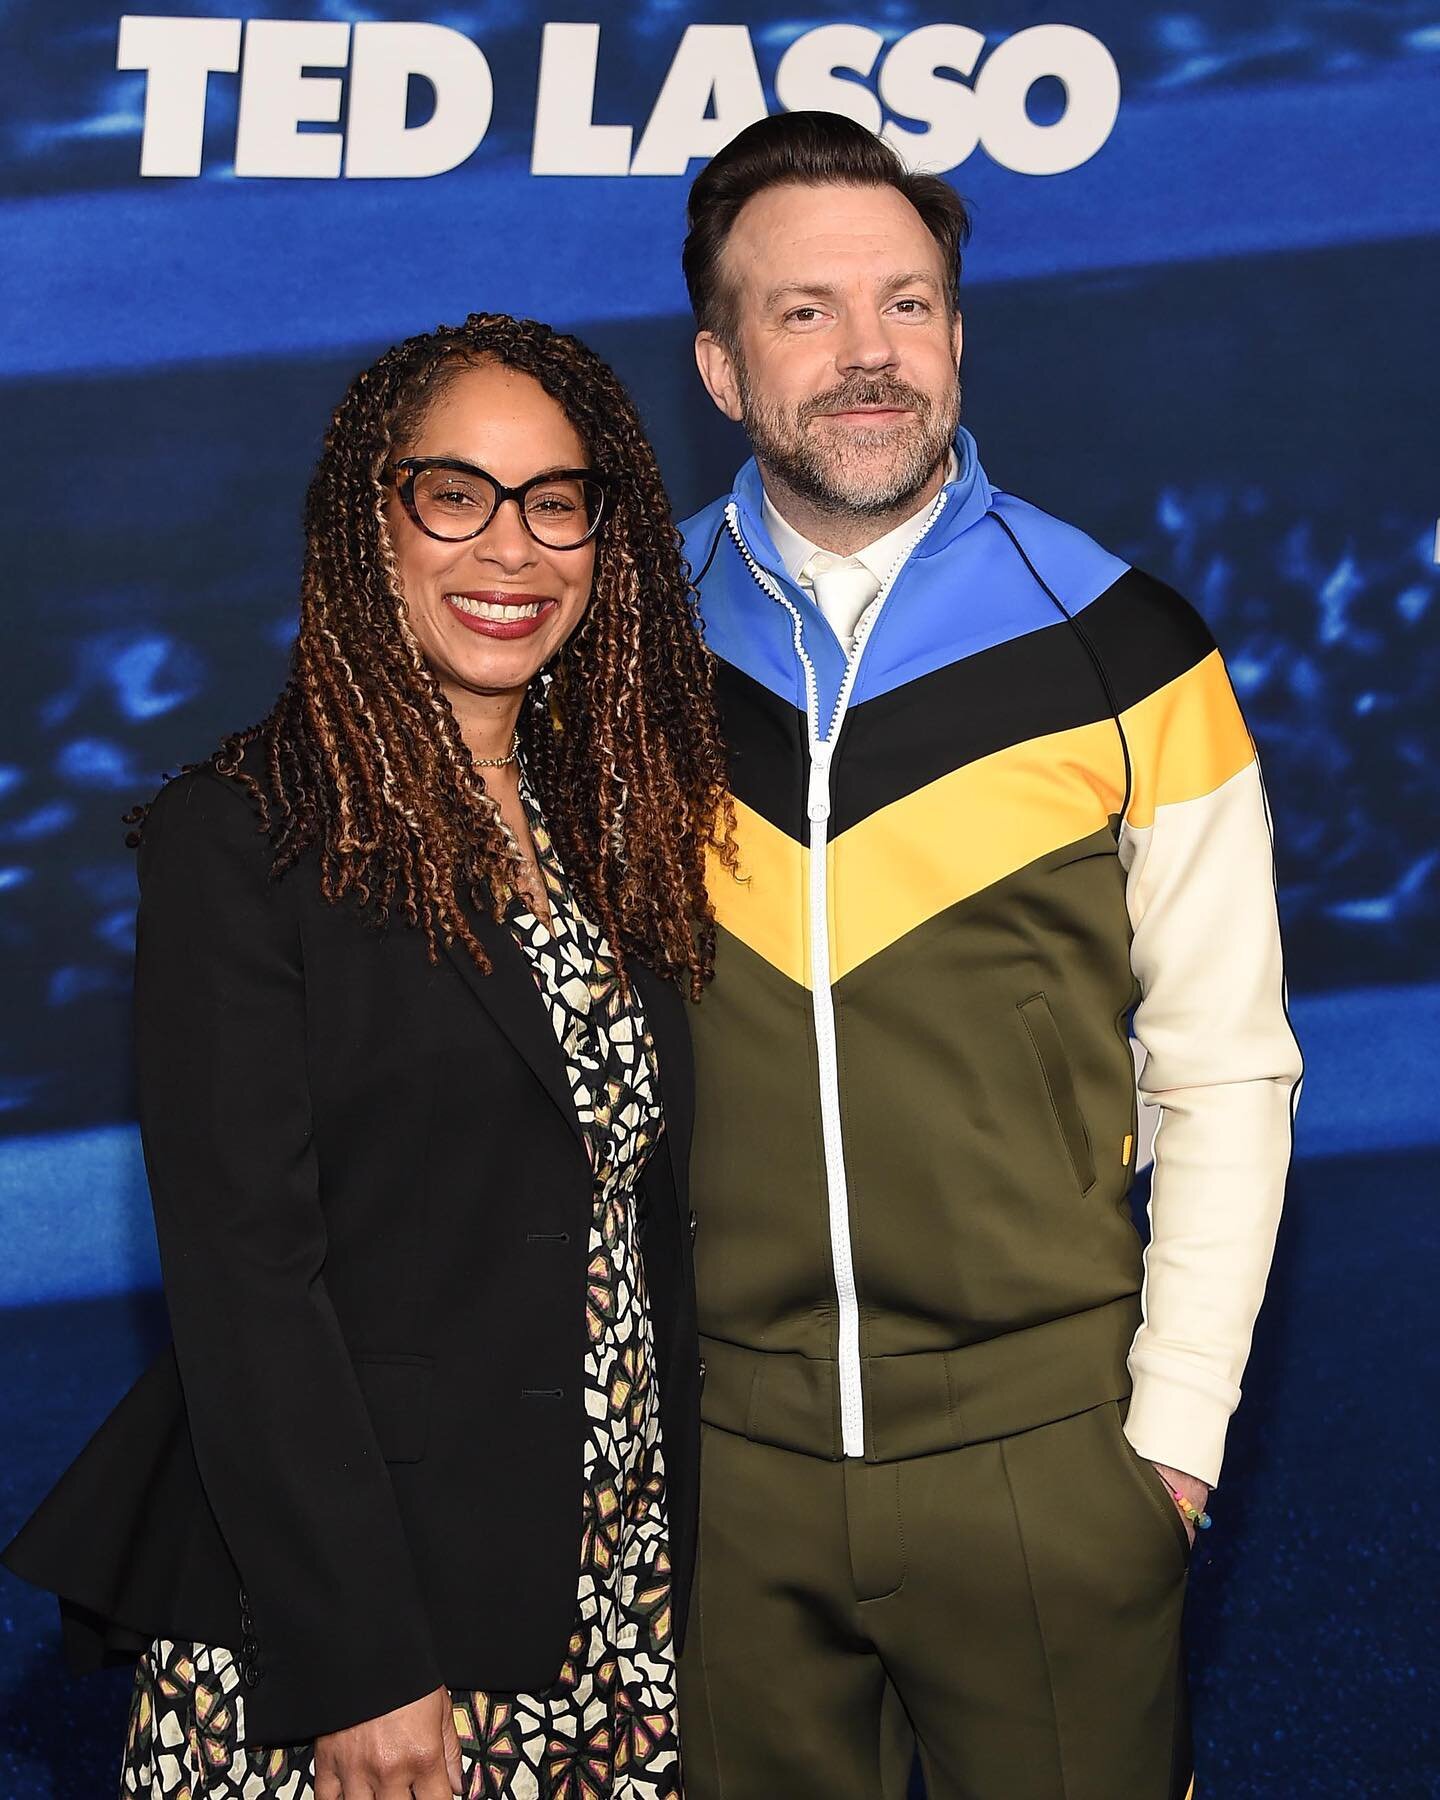 Warner Bros. Television&rsquo;s Ted Lasso Season 3 premiere with Studio Chairman &amp; CEO Channing Dungey and star Jason Sudeikis.

This photo hitting the press everywhere! 👏